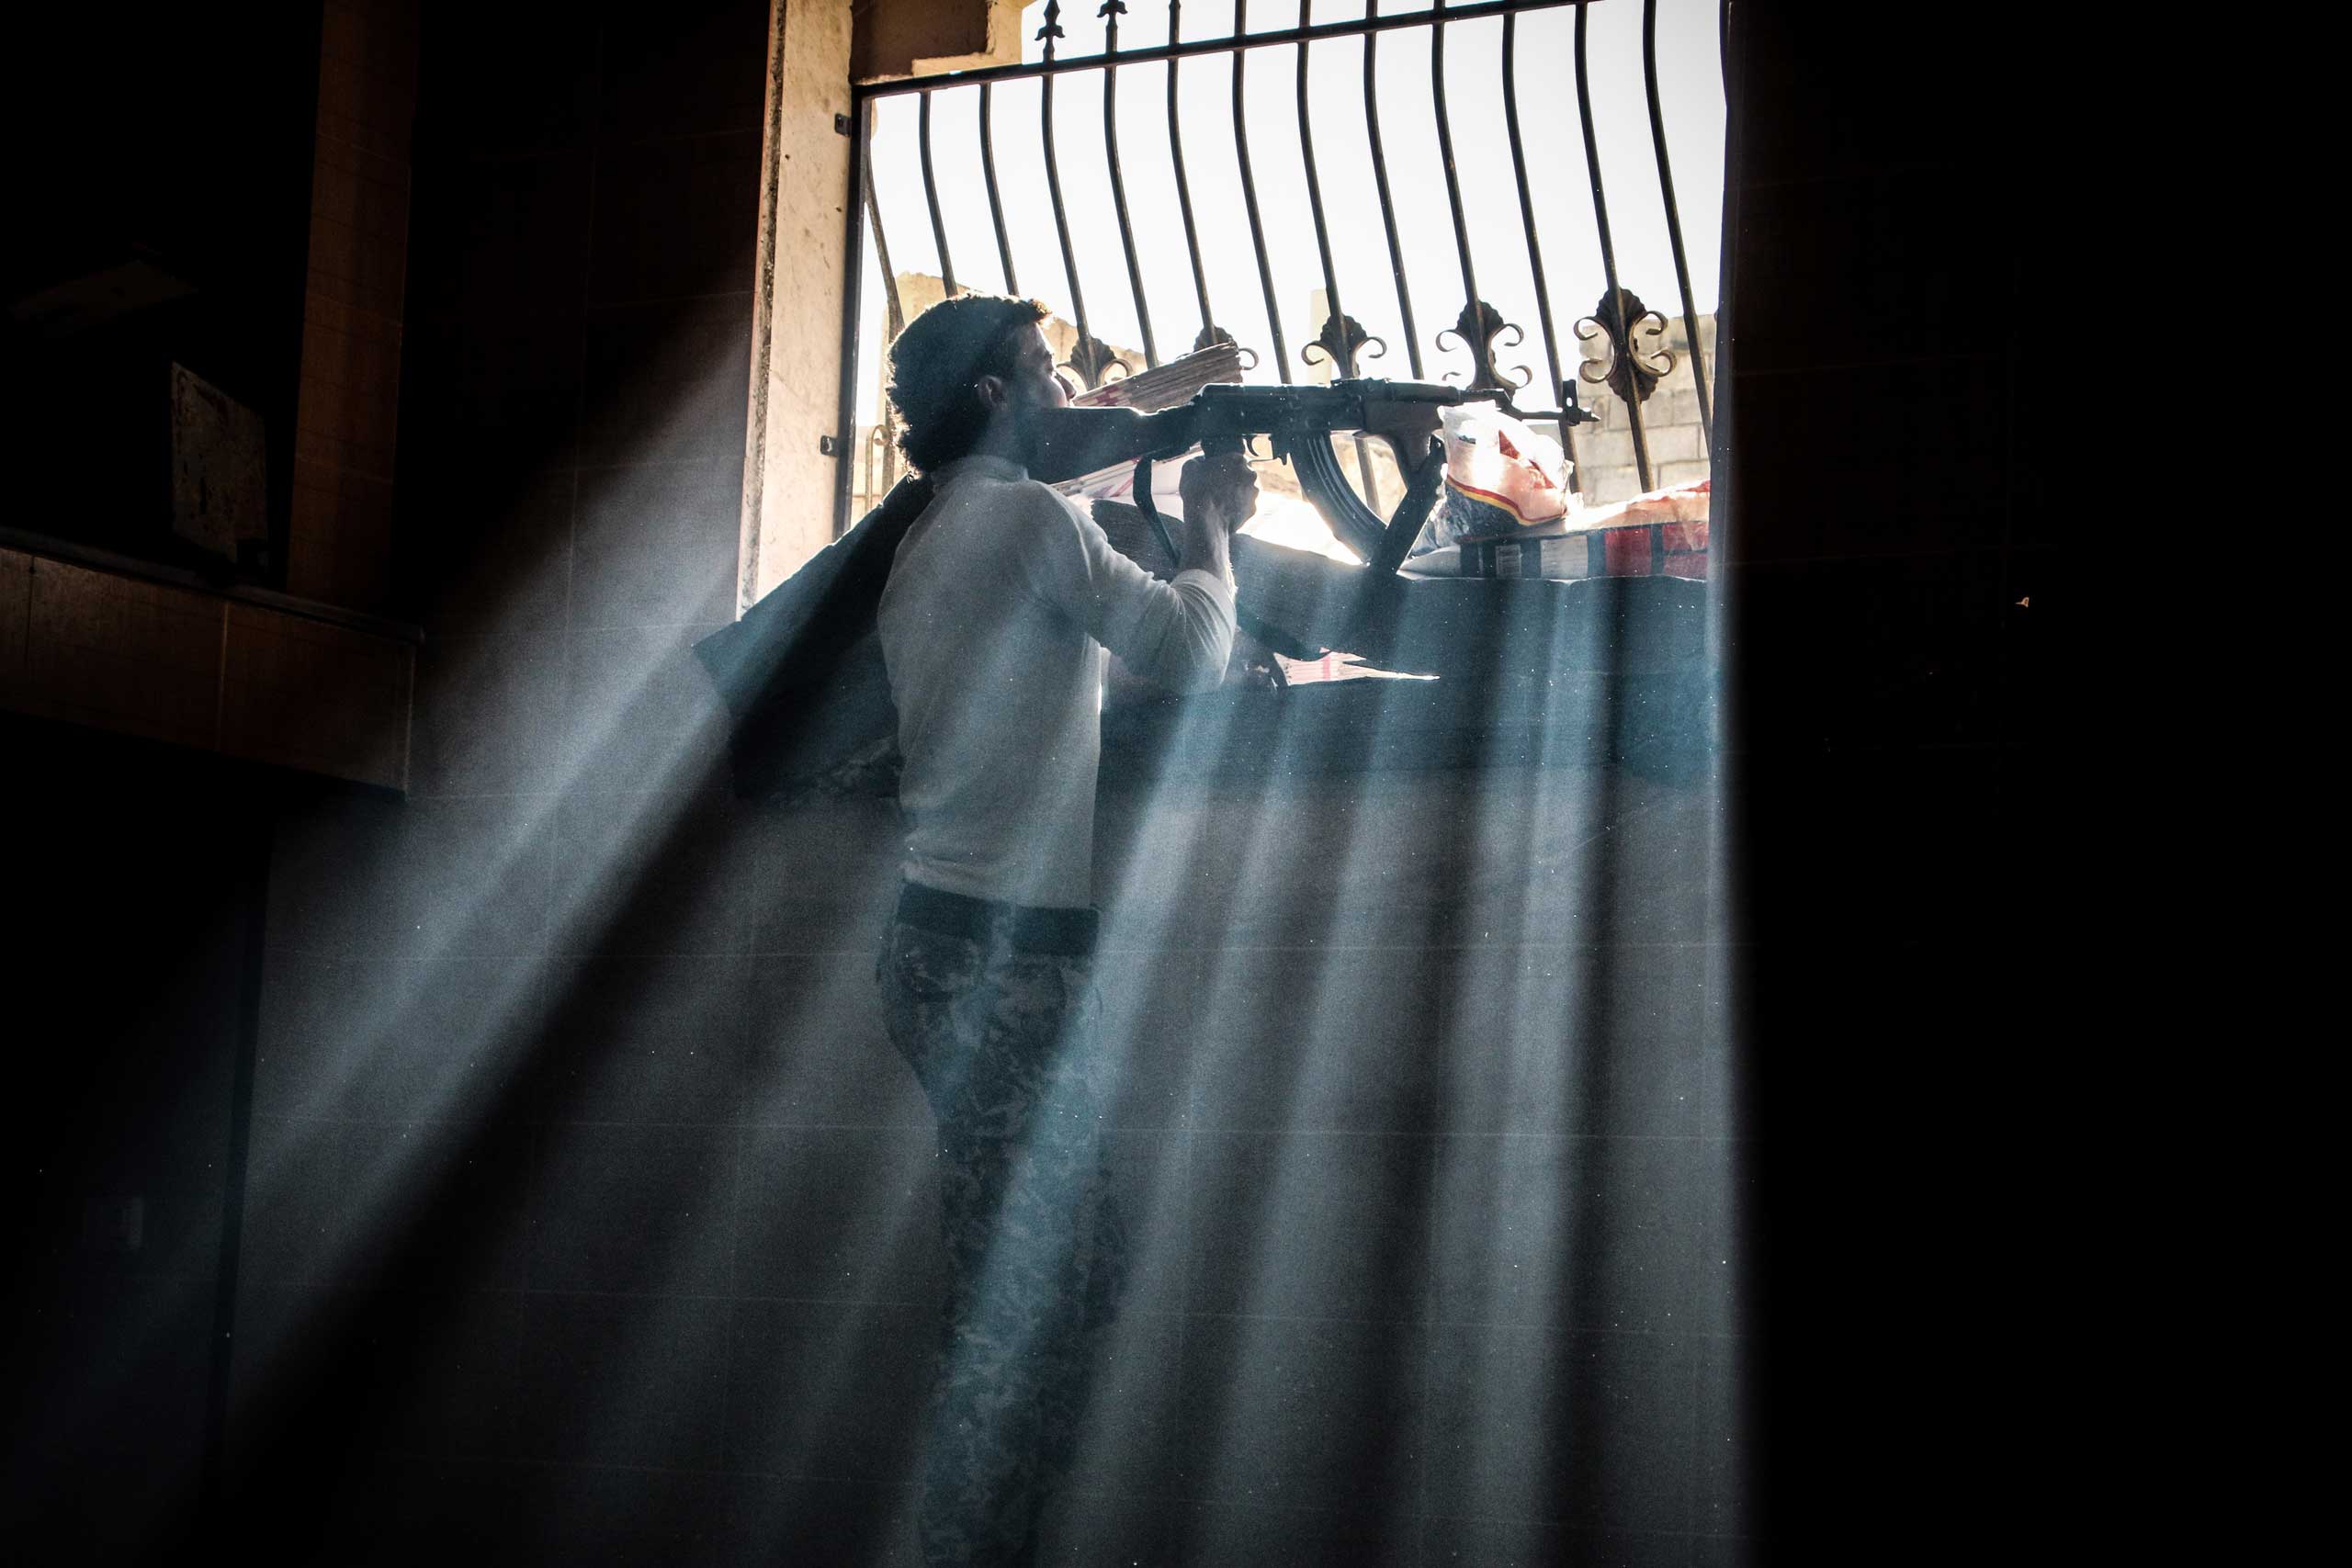 Dec. 17, 2014. Rebels fighter watching the movements of regime forces through a window, in Aleppo, Syria.